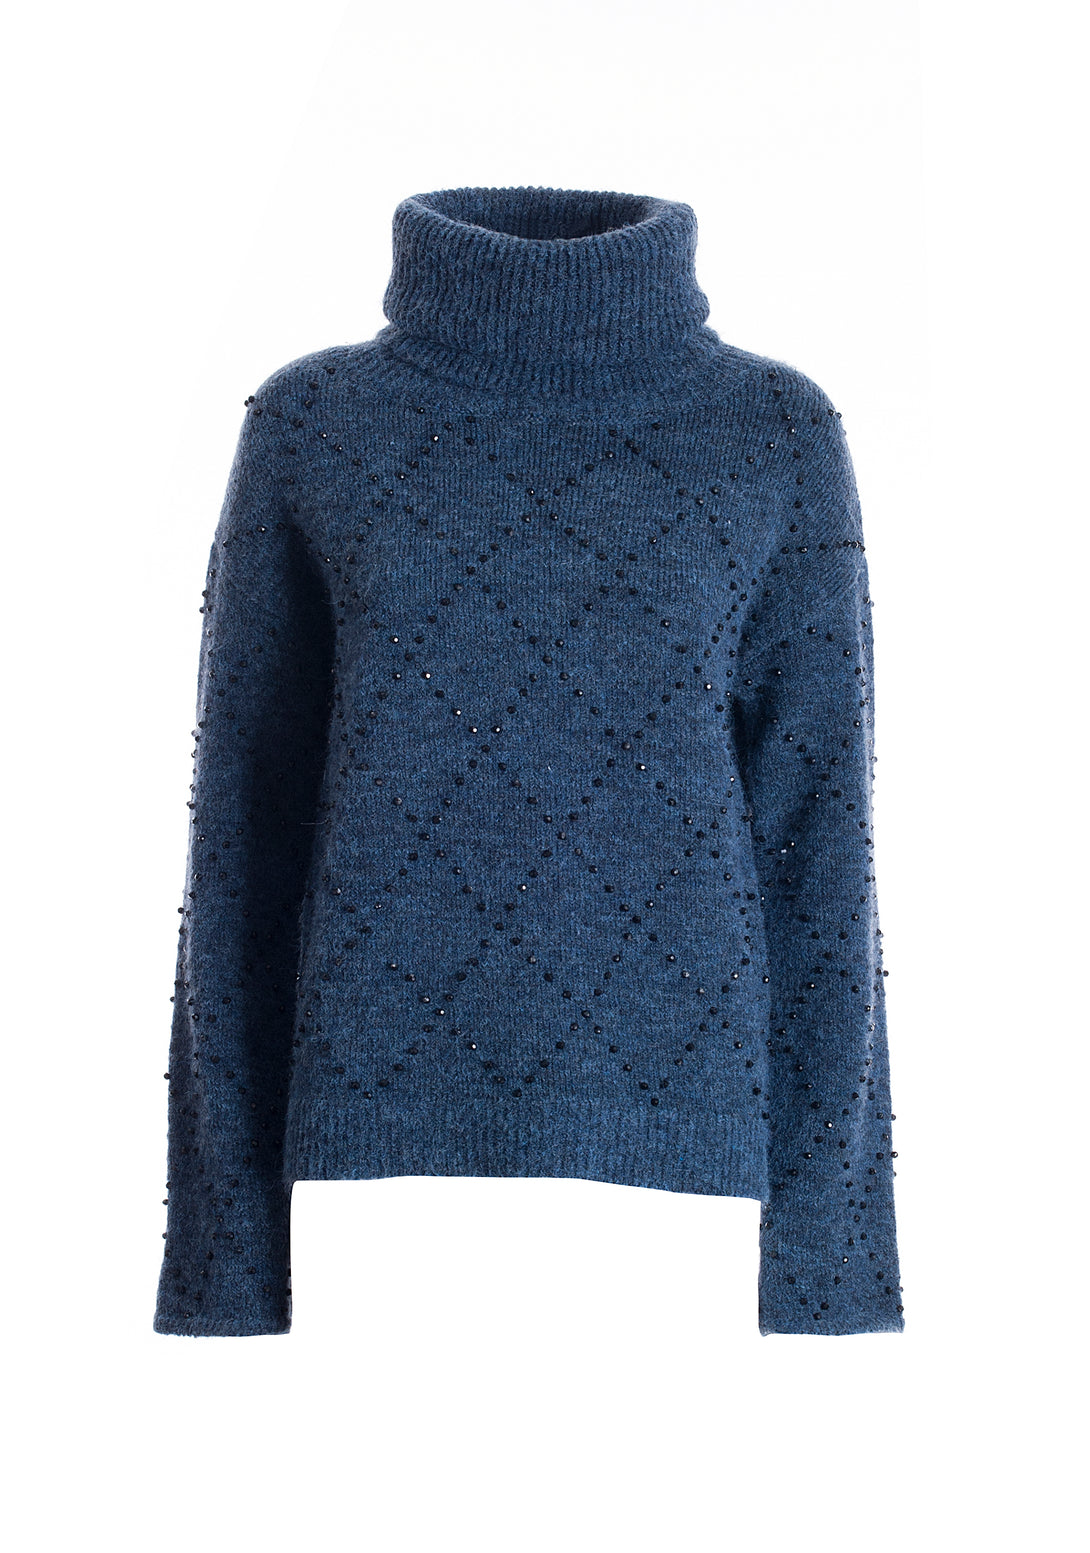 Knitwear wide fit with diamond shaped pattern made with shiny strasses